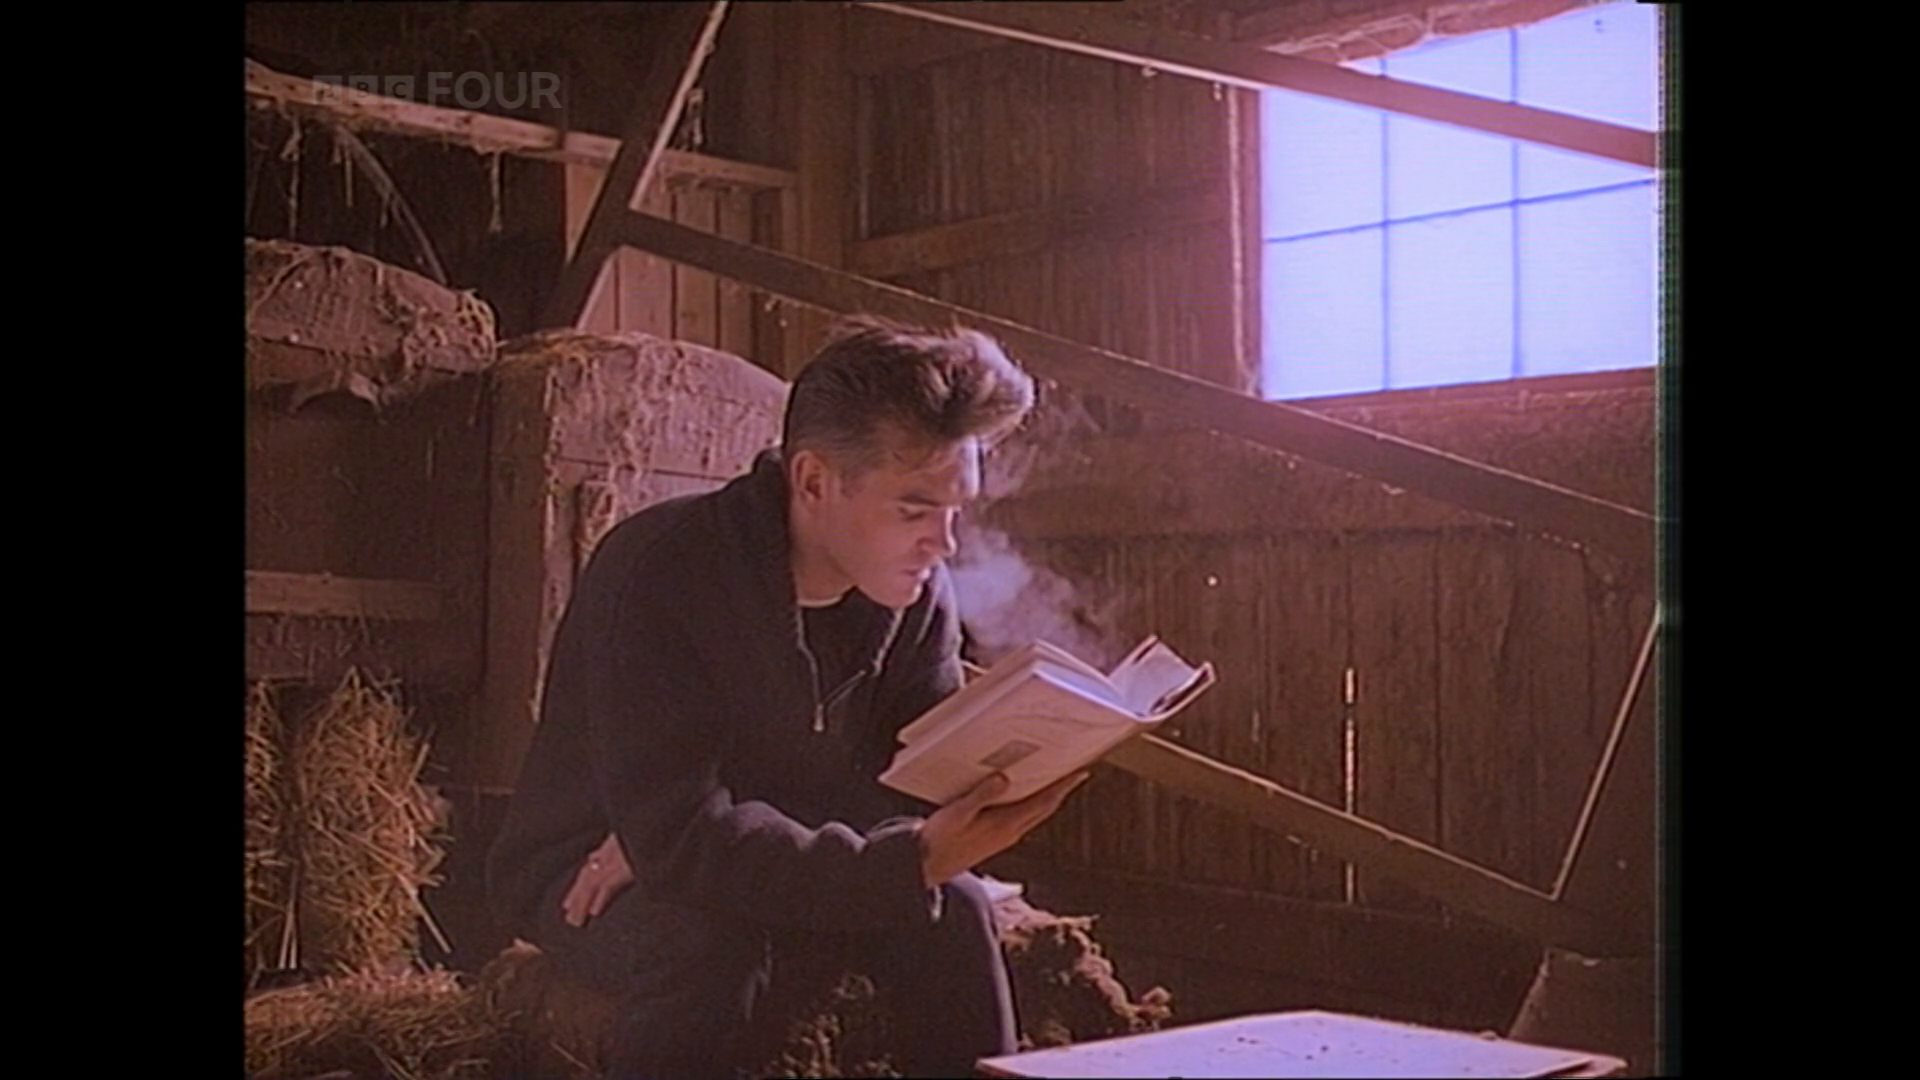 Suedehead / Morrissey (Via Music Video)  - Top of the Pops (February 25th, 1988)